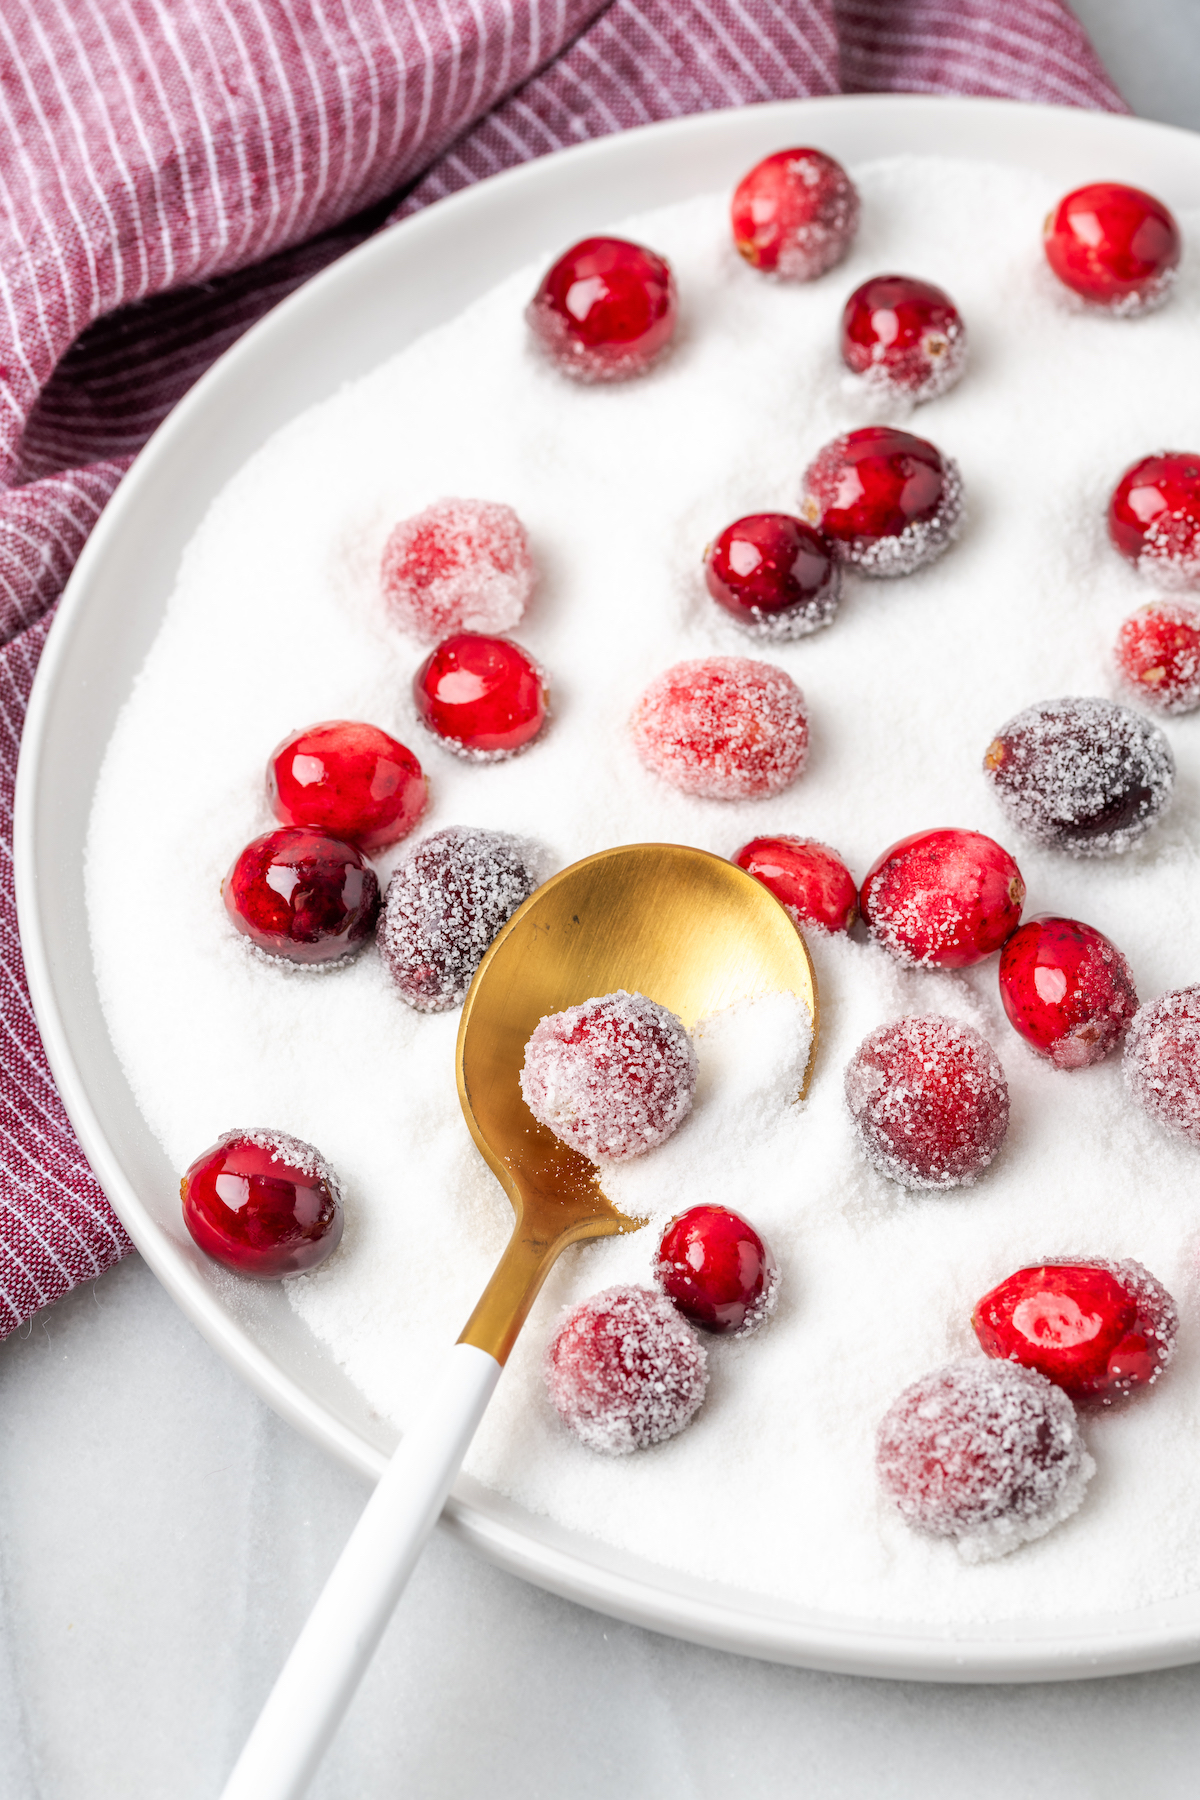 Cranberries being coated in sugar on white plate with spoon